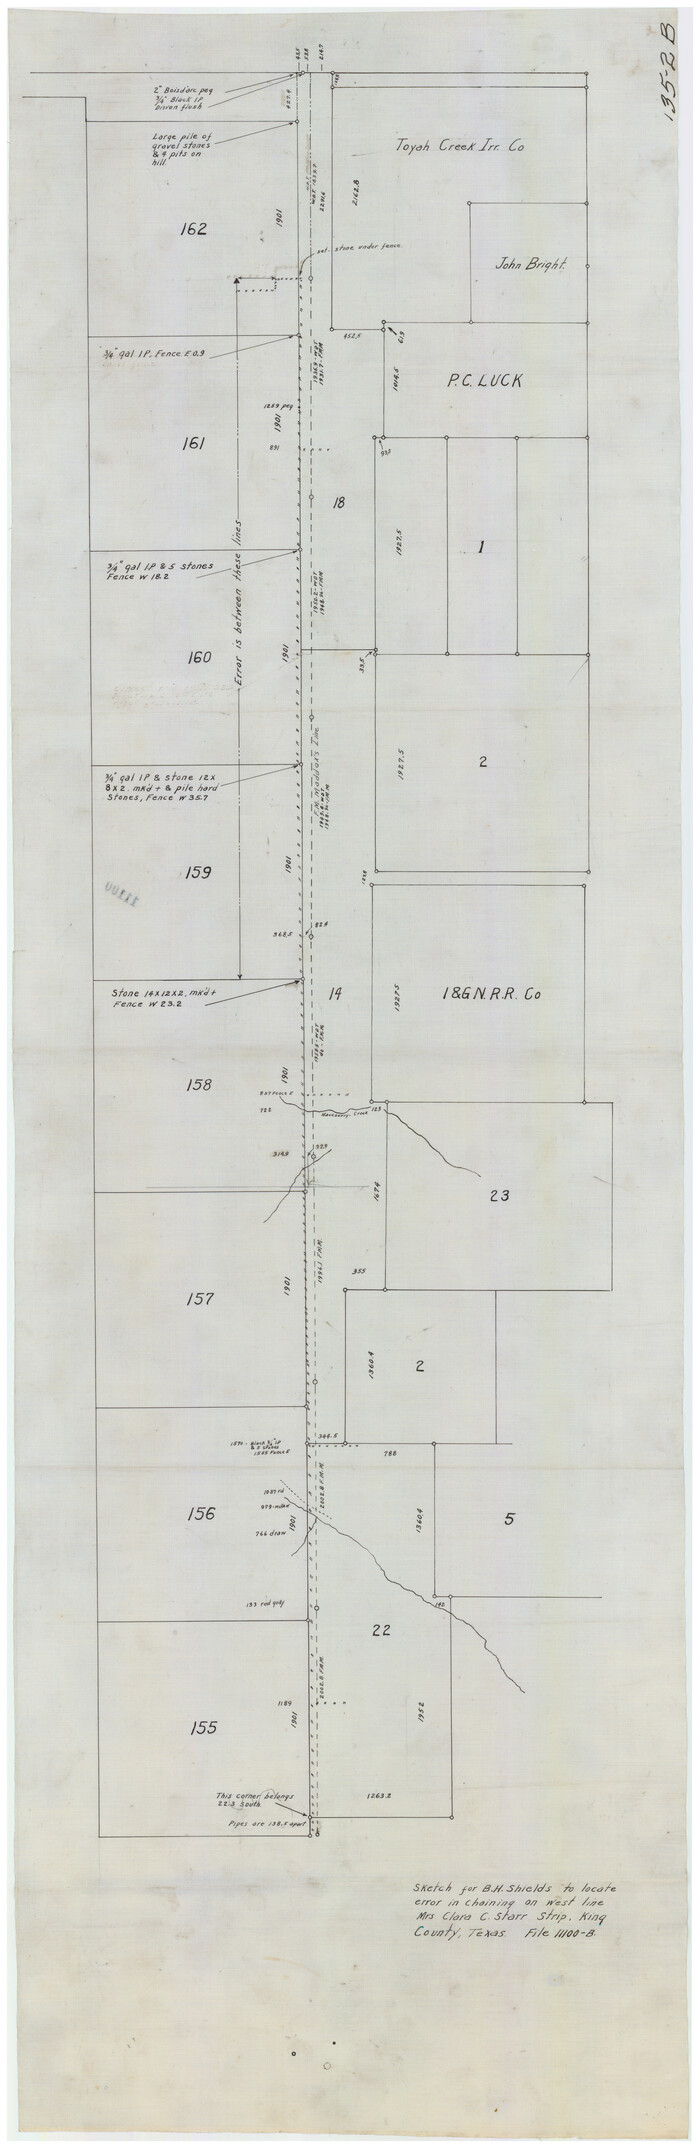 91037, [Sections 155-162, Toyah Creek Irrigation Company and surrounding surveys], Twichell Survey Records